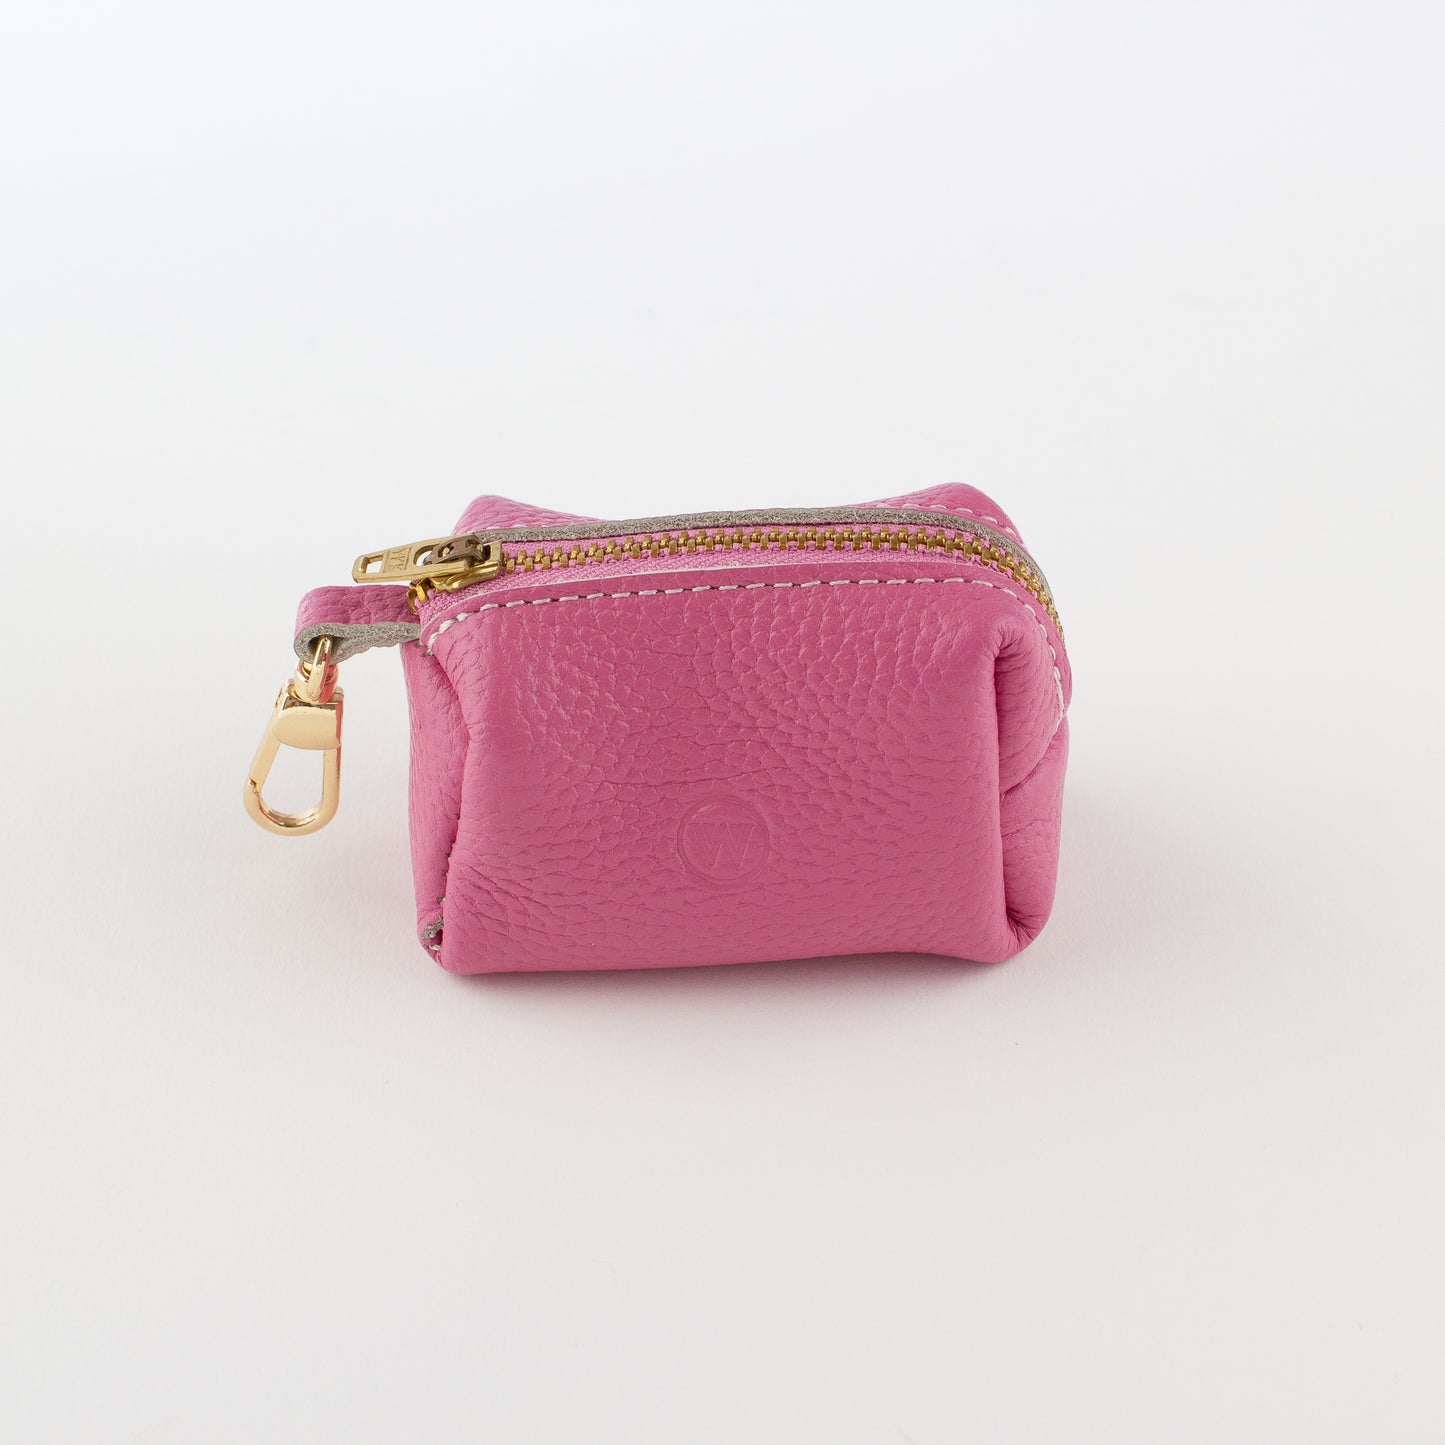 Pink leather poo bag Willow Walks